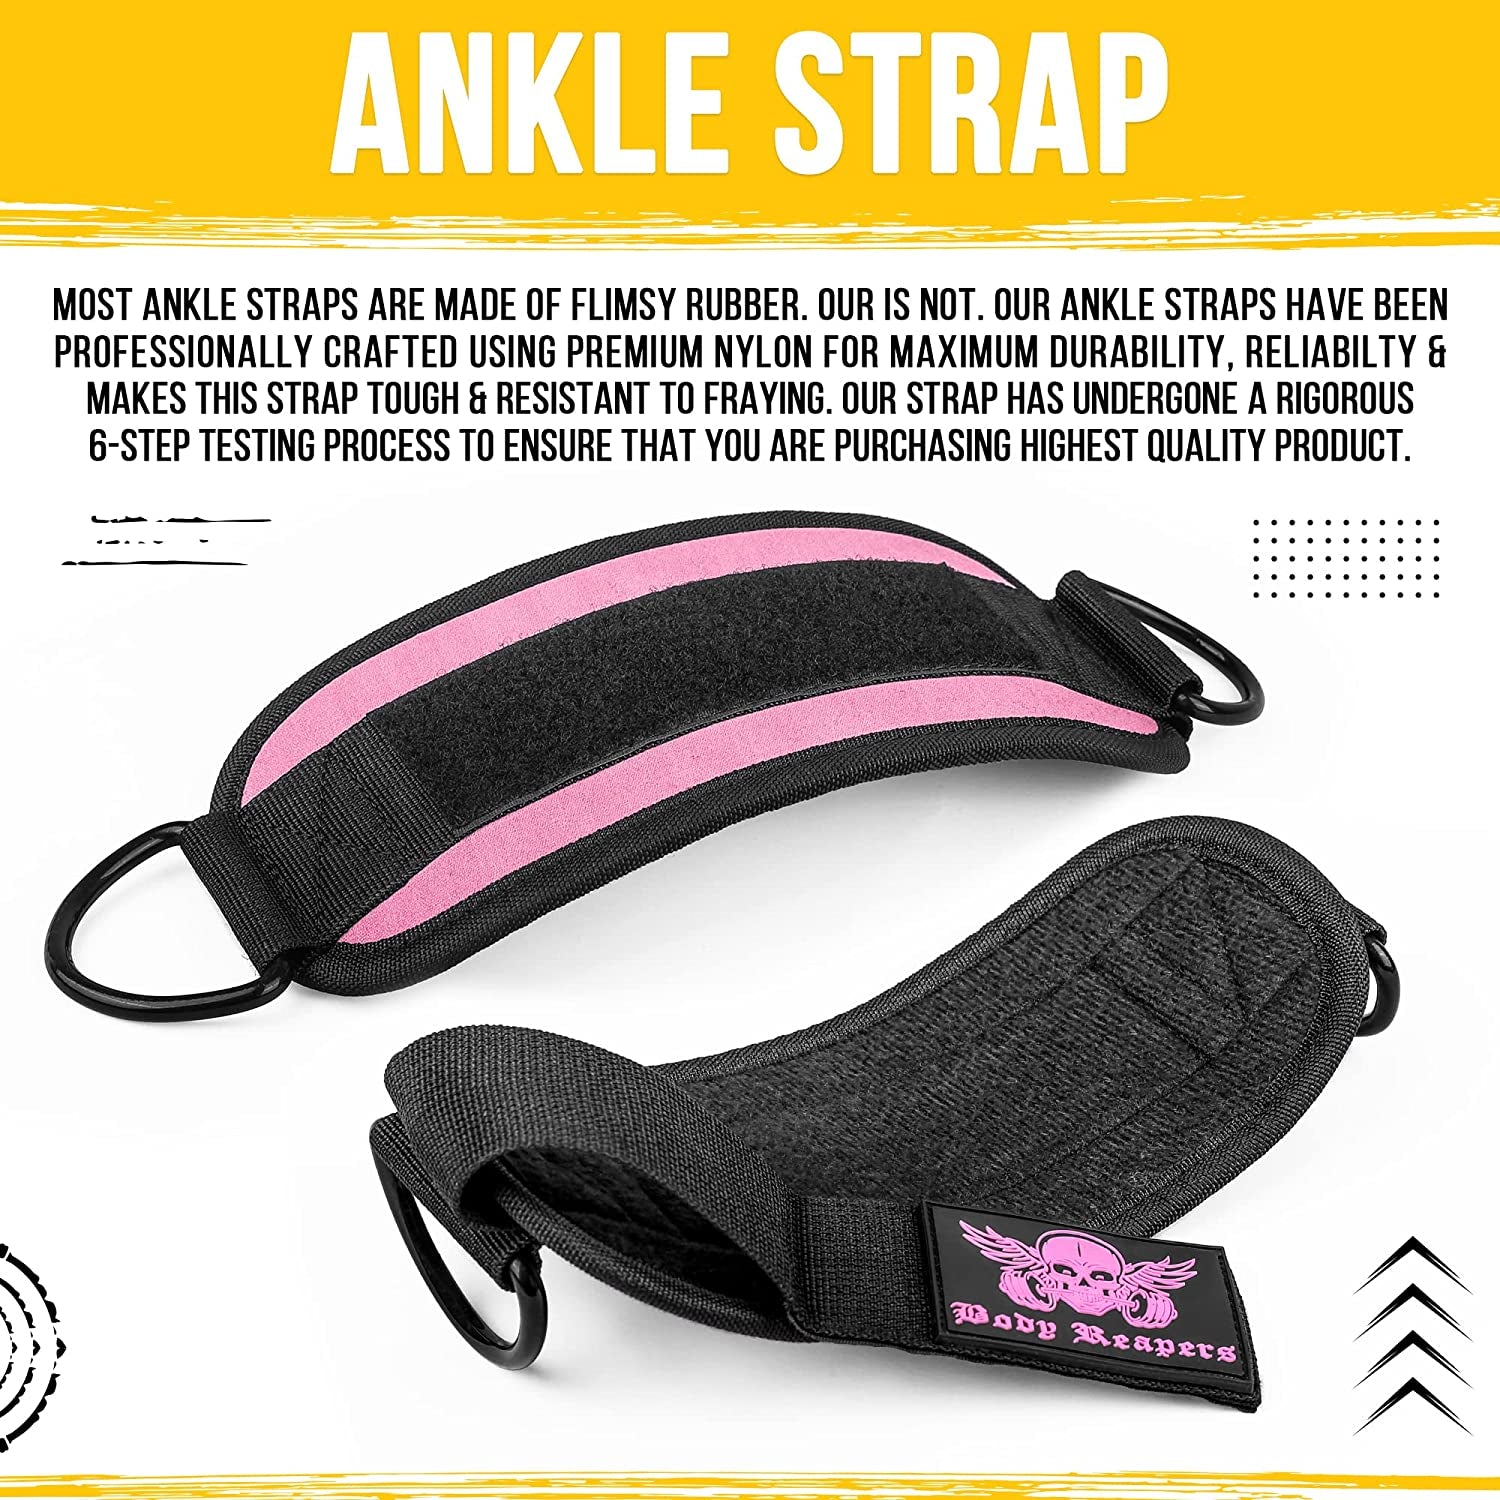 Gym Ankle Strap for Cable Machine, Adjustable Ankle Straps for Working Out, Neoprene Padded for Glute Kickbacks & Lower Body Exercises, Ankle Cuffs for Men & Women Gym Accessories